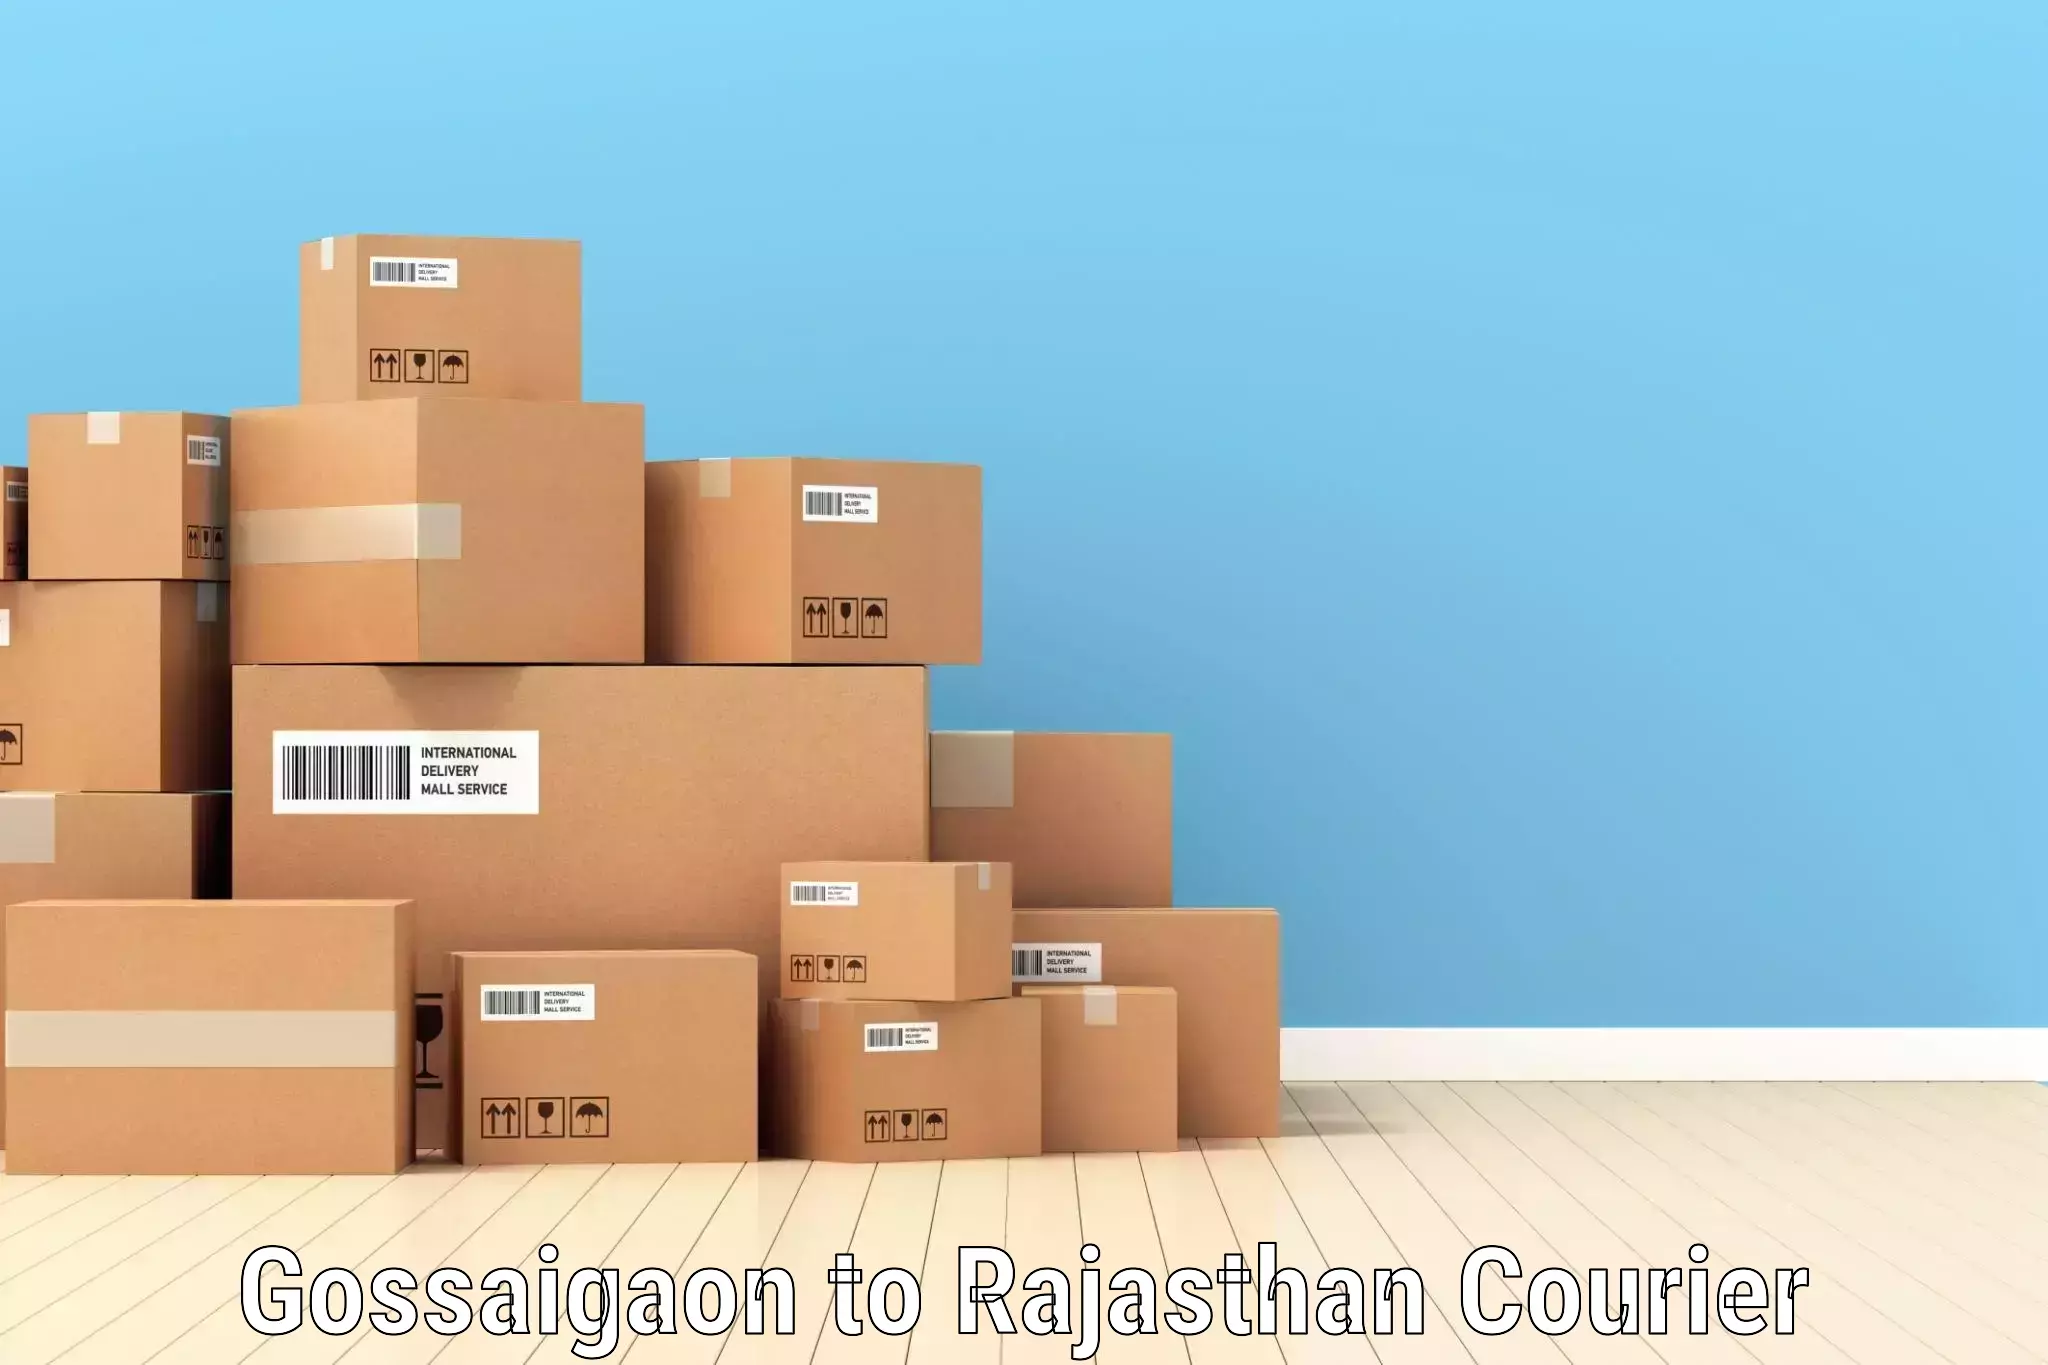 Package tracking in Gossaigaon to Kuchaman